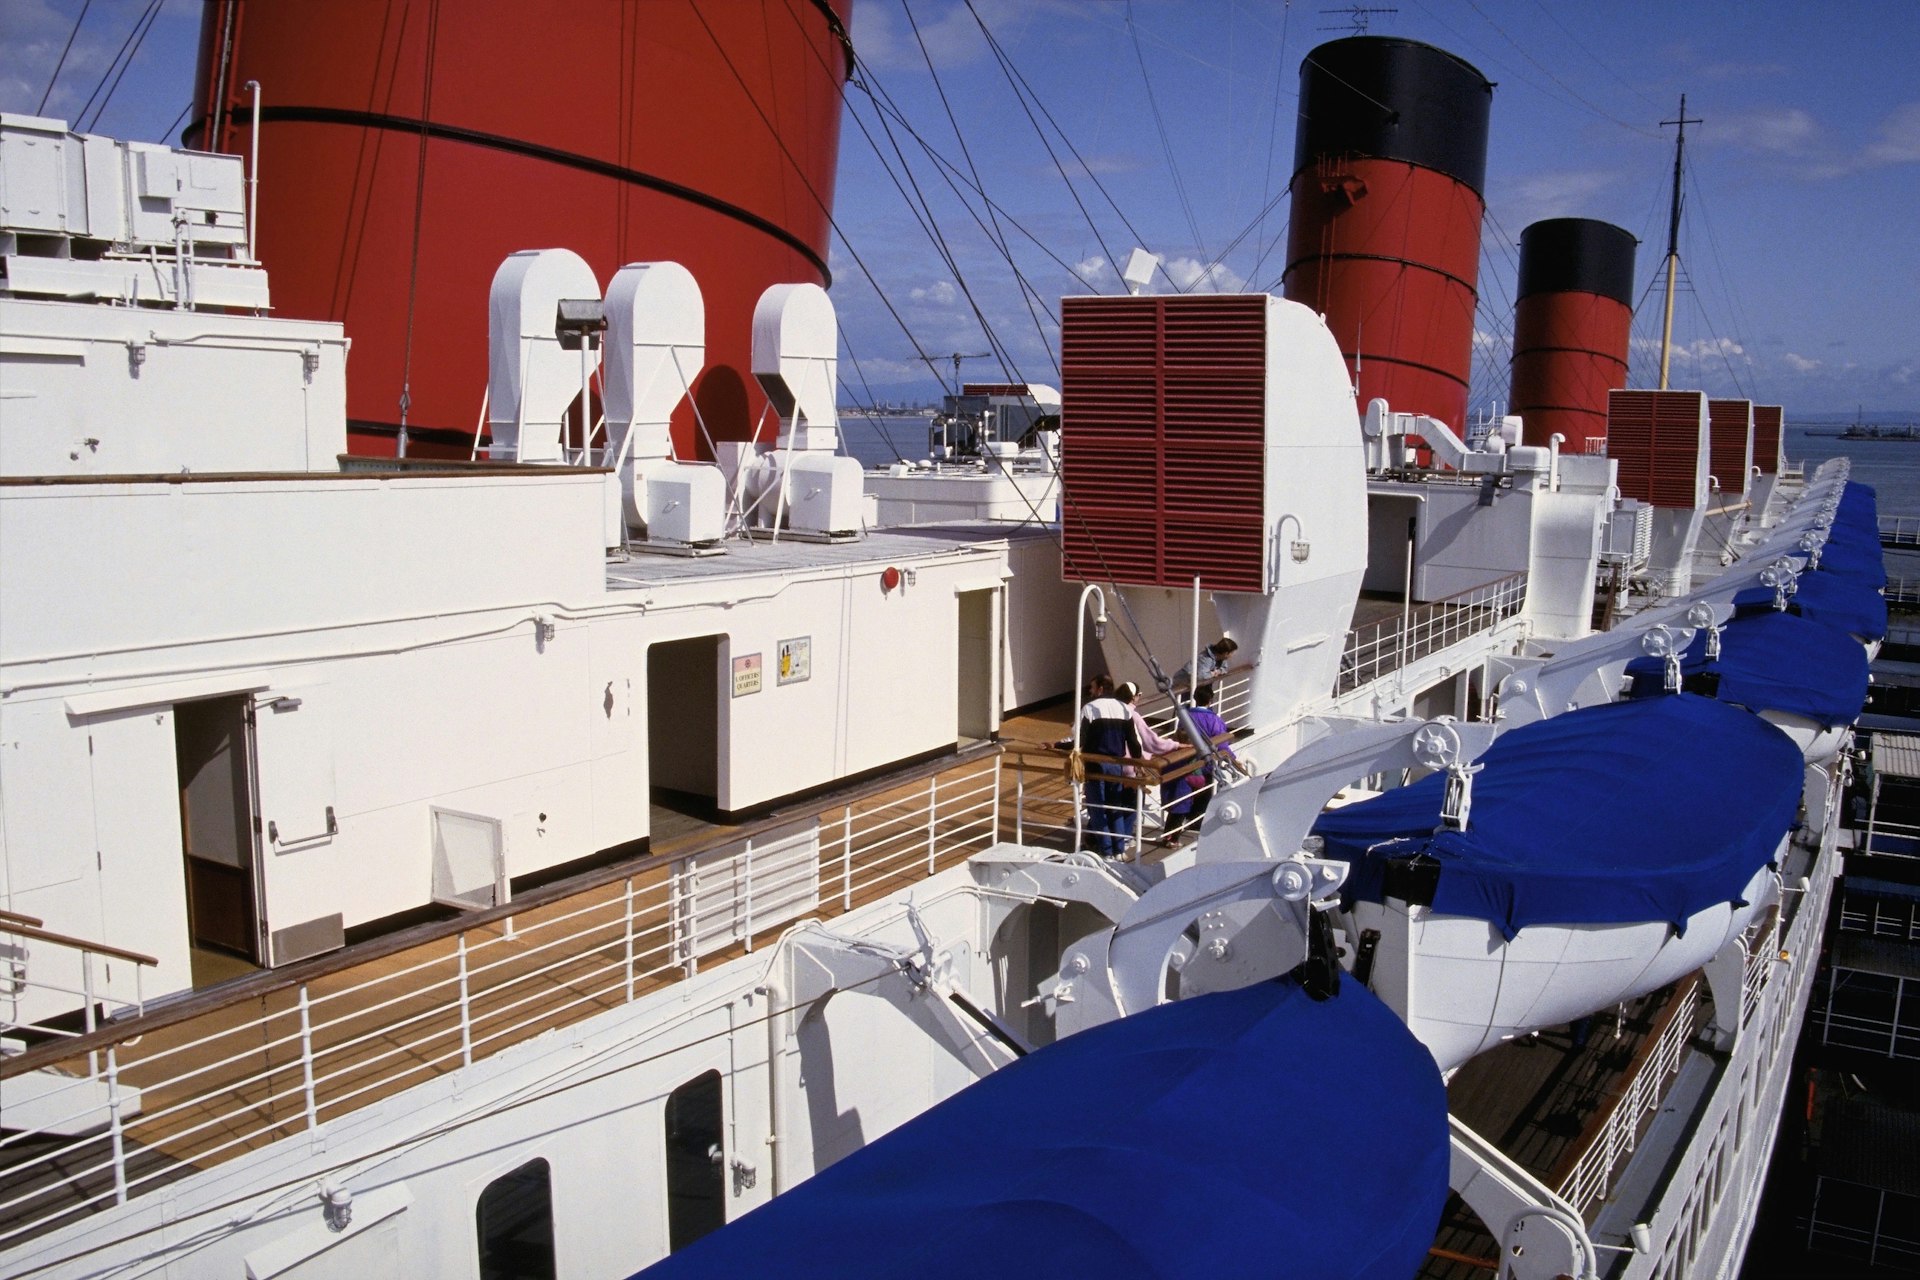 Upper Deck and Lifeboats on the Queen Mary Seaport